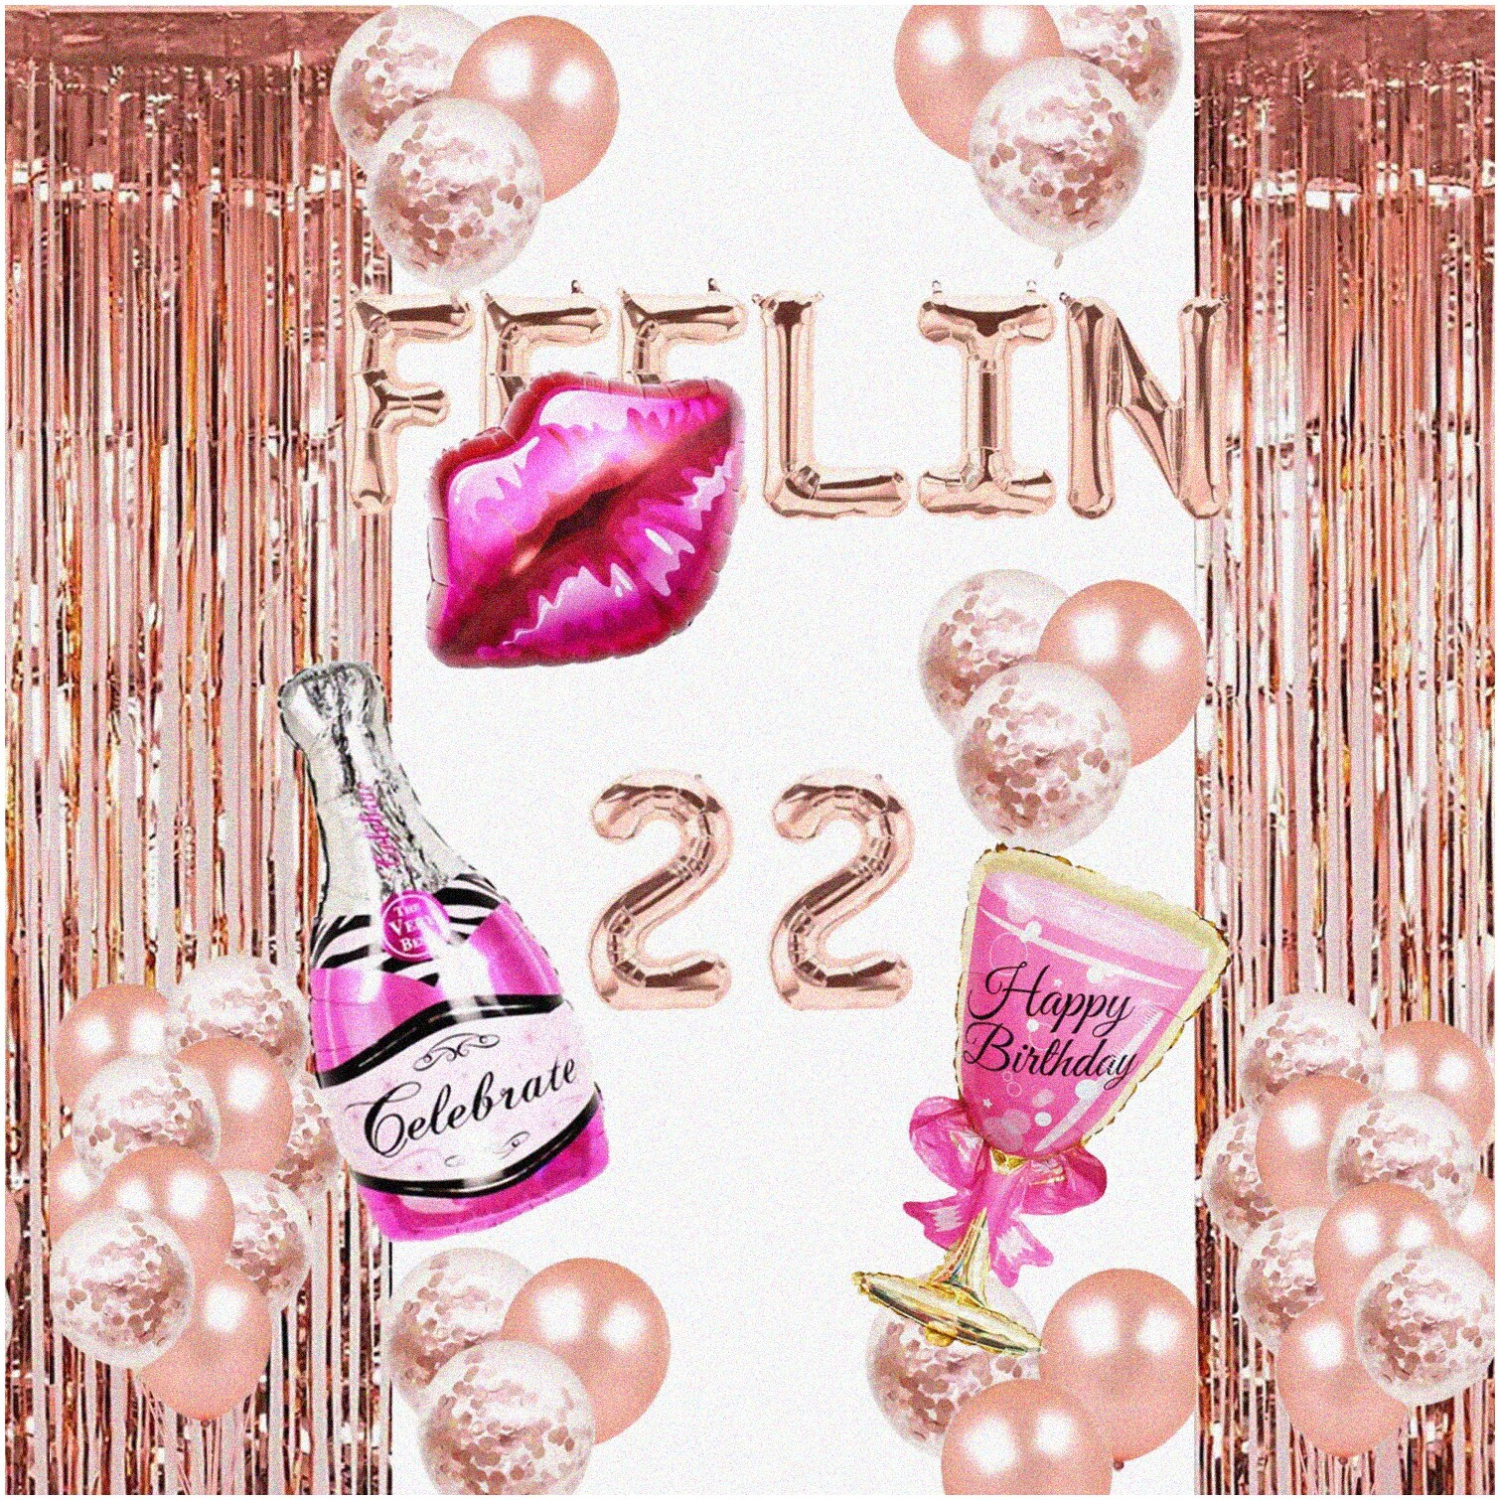 Fabulous 22nd Birthday Bash: Rose Gold Balloons & Party Decorations - Sweet 22, Hello 22, Cheers to 22! Red Kissy Lips, Champagne Bottle Theme - Celebrate 22 Years in Style!